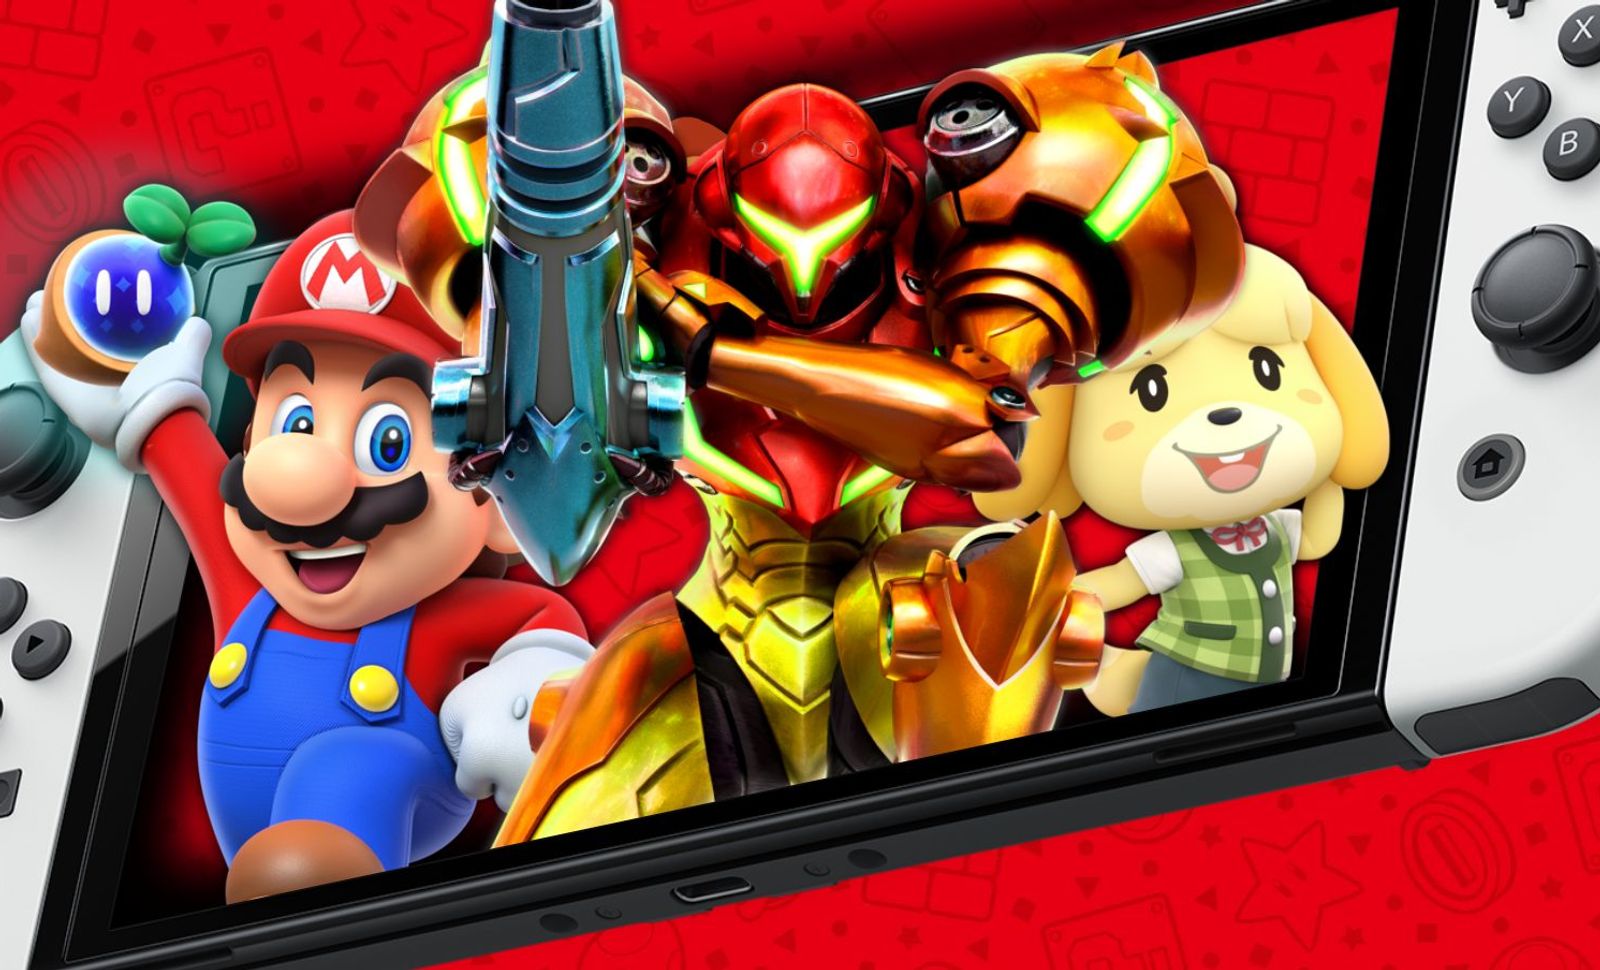 Mario, Samus Aran and Isabelle jumping out of the Nintendo Switch 2 screen.